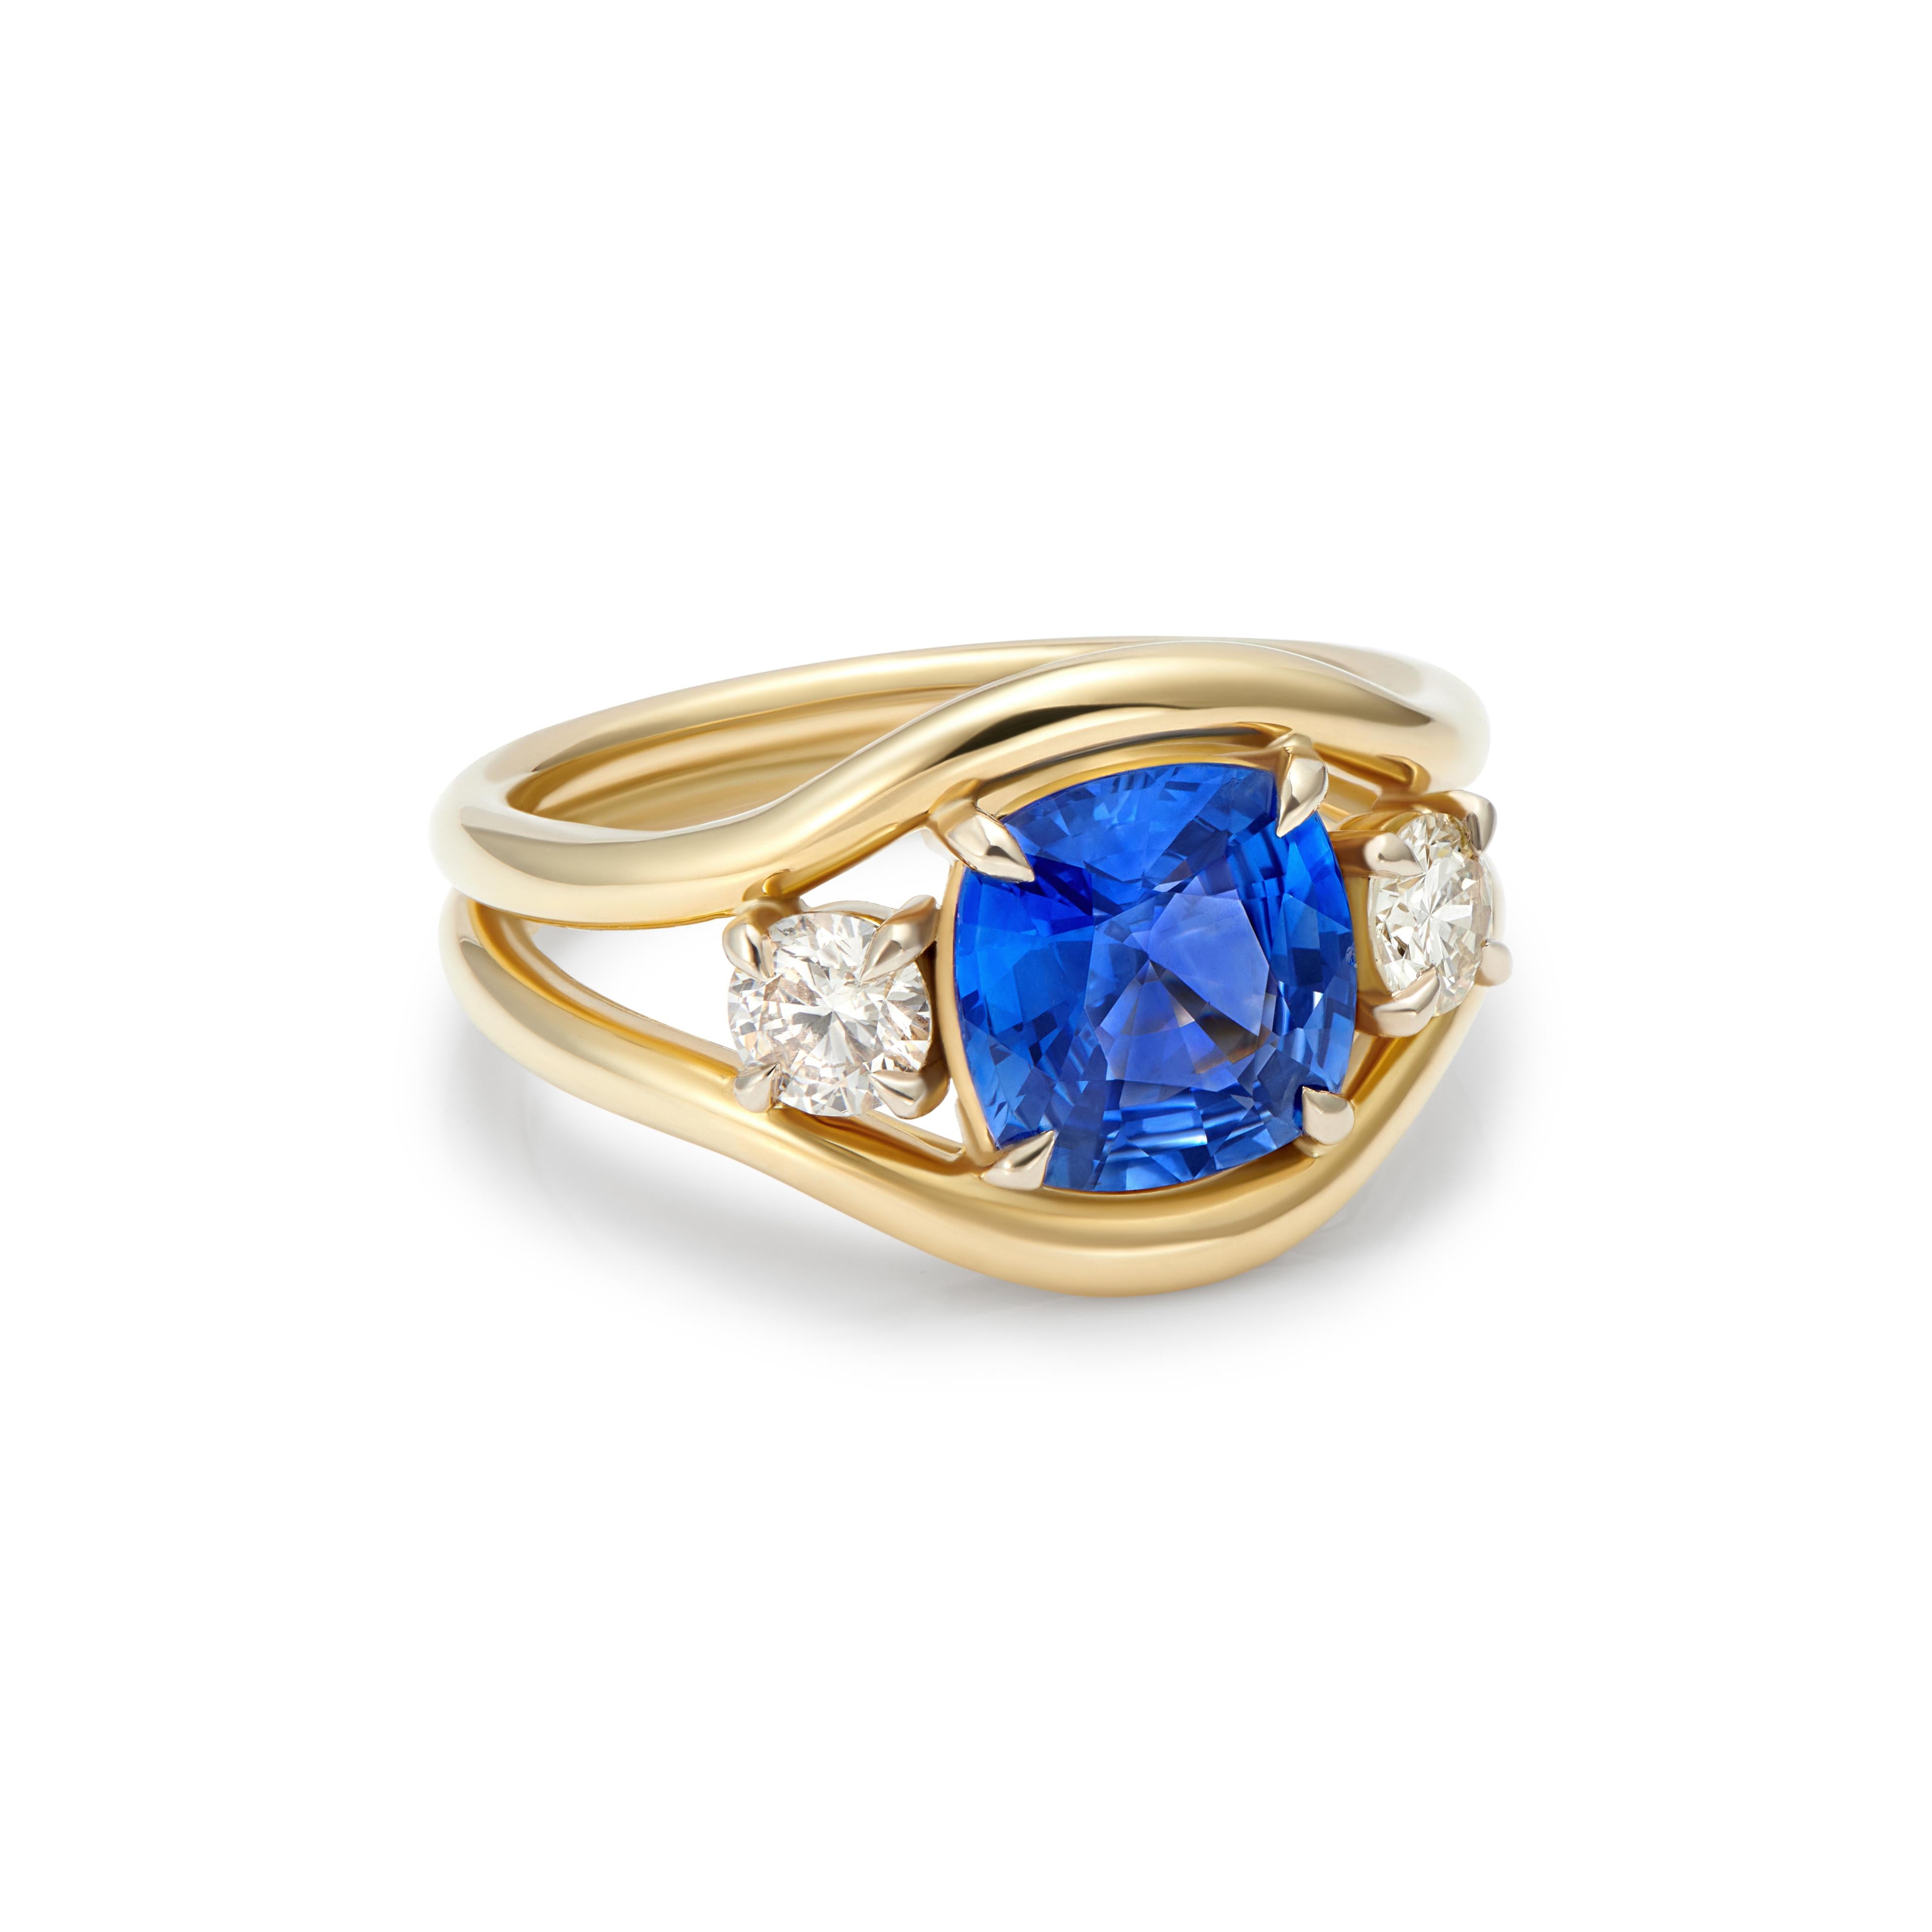 18k Yellow Gold
2.72ct Blue Sapphire
0.50ct Diamonds
Total weight of ring: 8.27g

Inspired by the elegant shape of a mermaid’s tail, this collection pays homage to oceanic treasures with beautiful pearls, shimmering diamonds, and aquatic-coloured